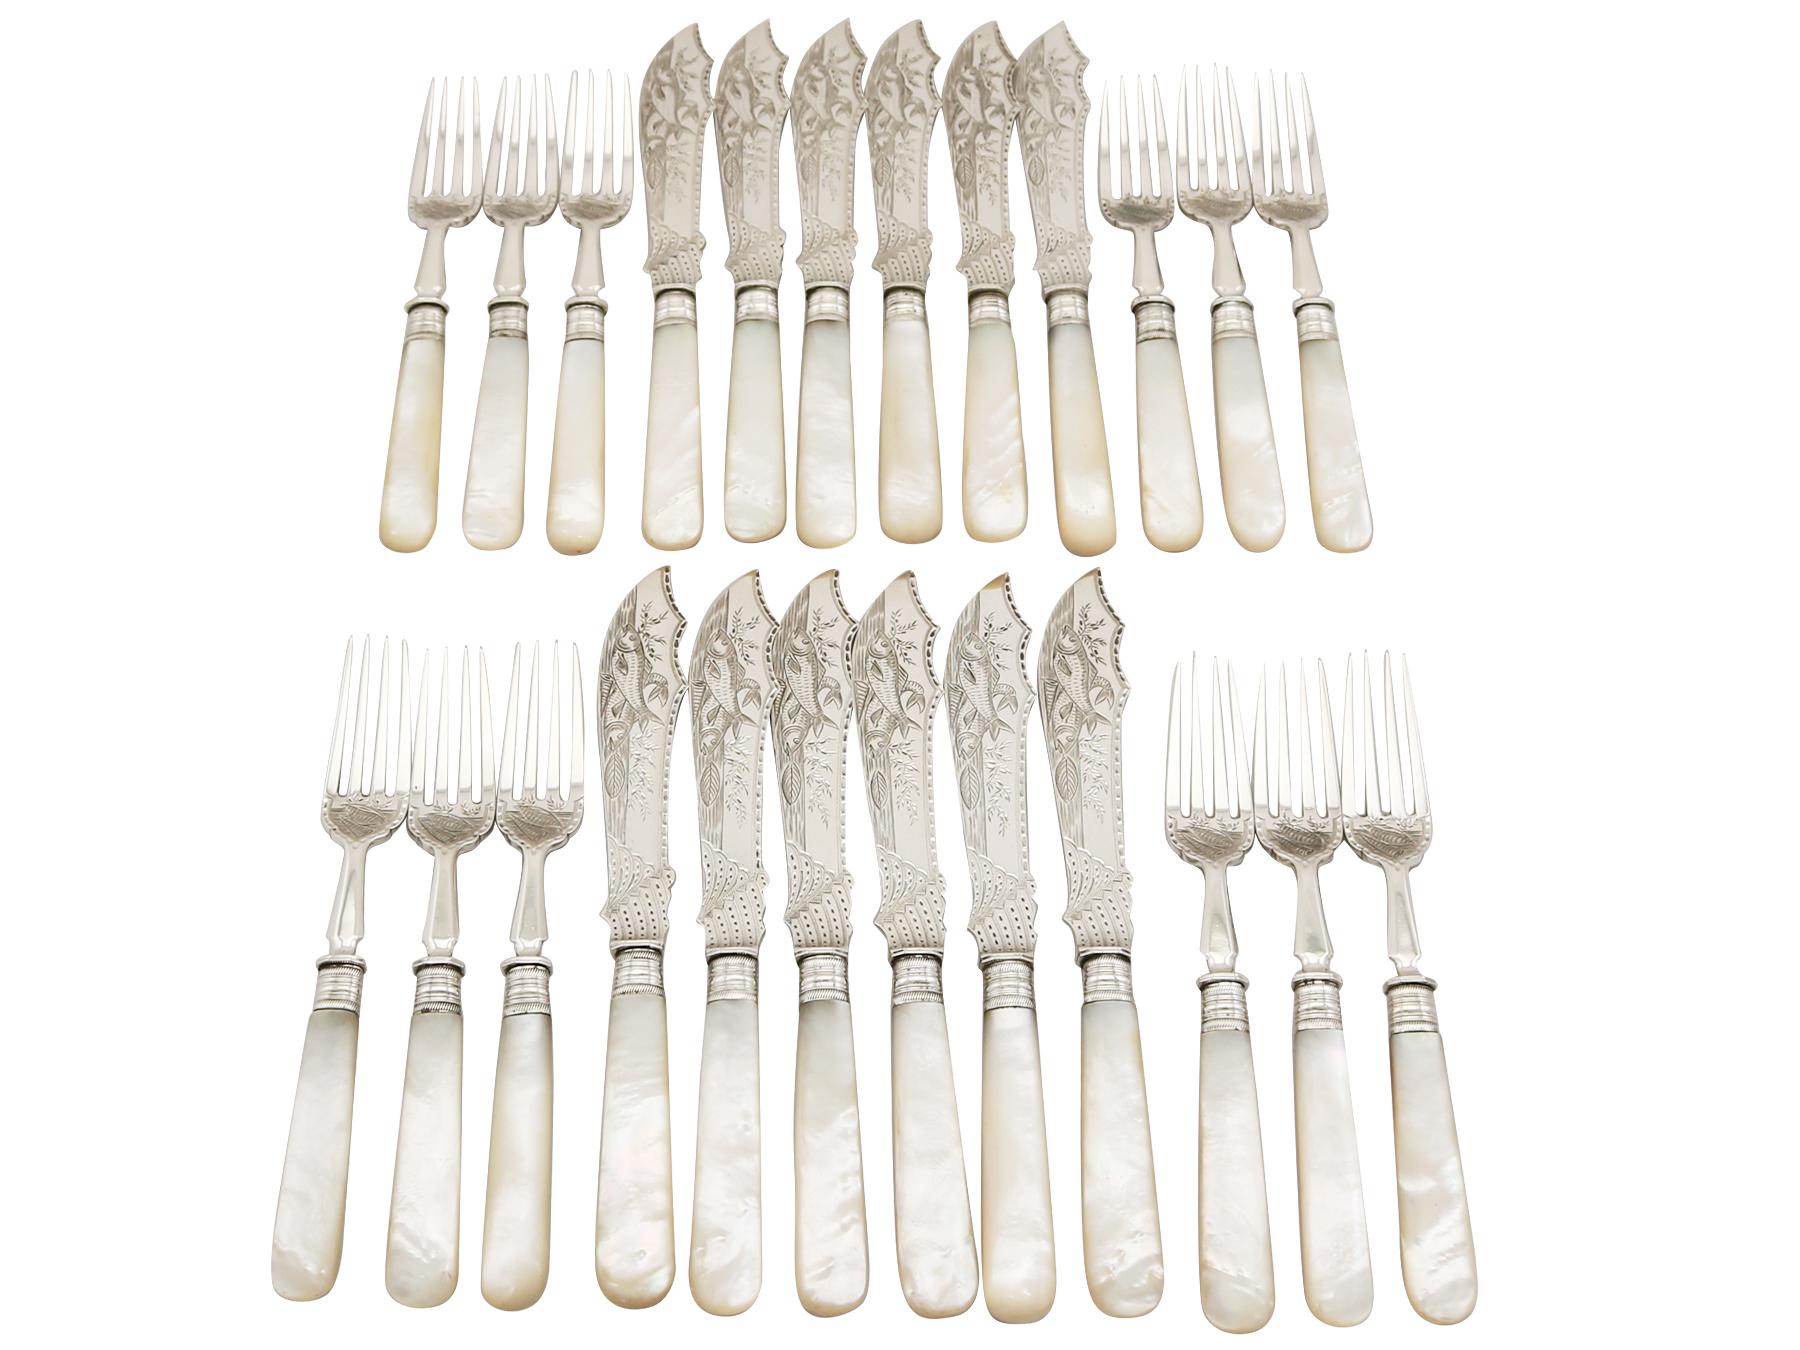 An exceptional, fine and impressive antique Victorian English sterling silver and mother of pearl handled fish service for twelve persons - boxed; an addition to our silver flatware collection.

This exceptional antique Victorian mother of pearl